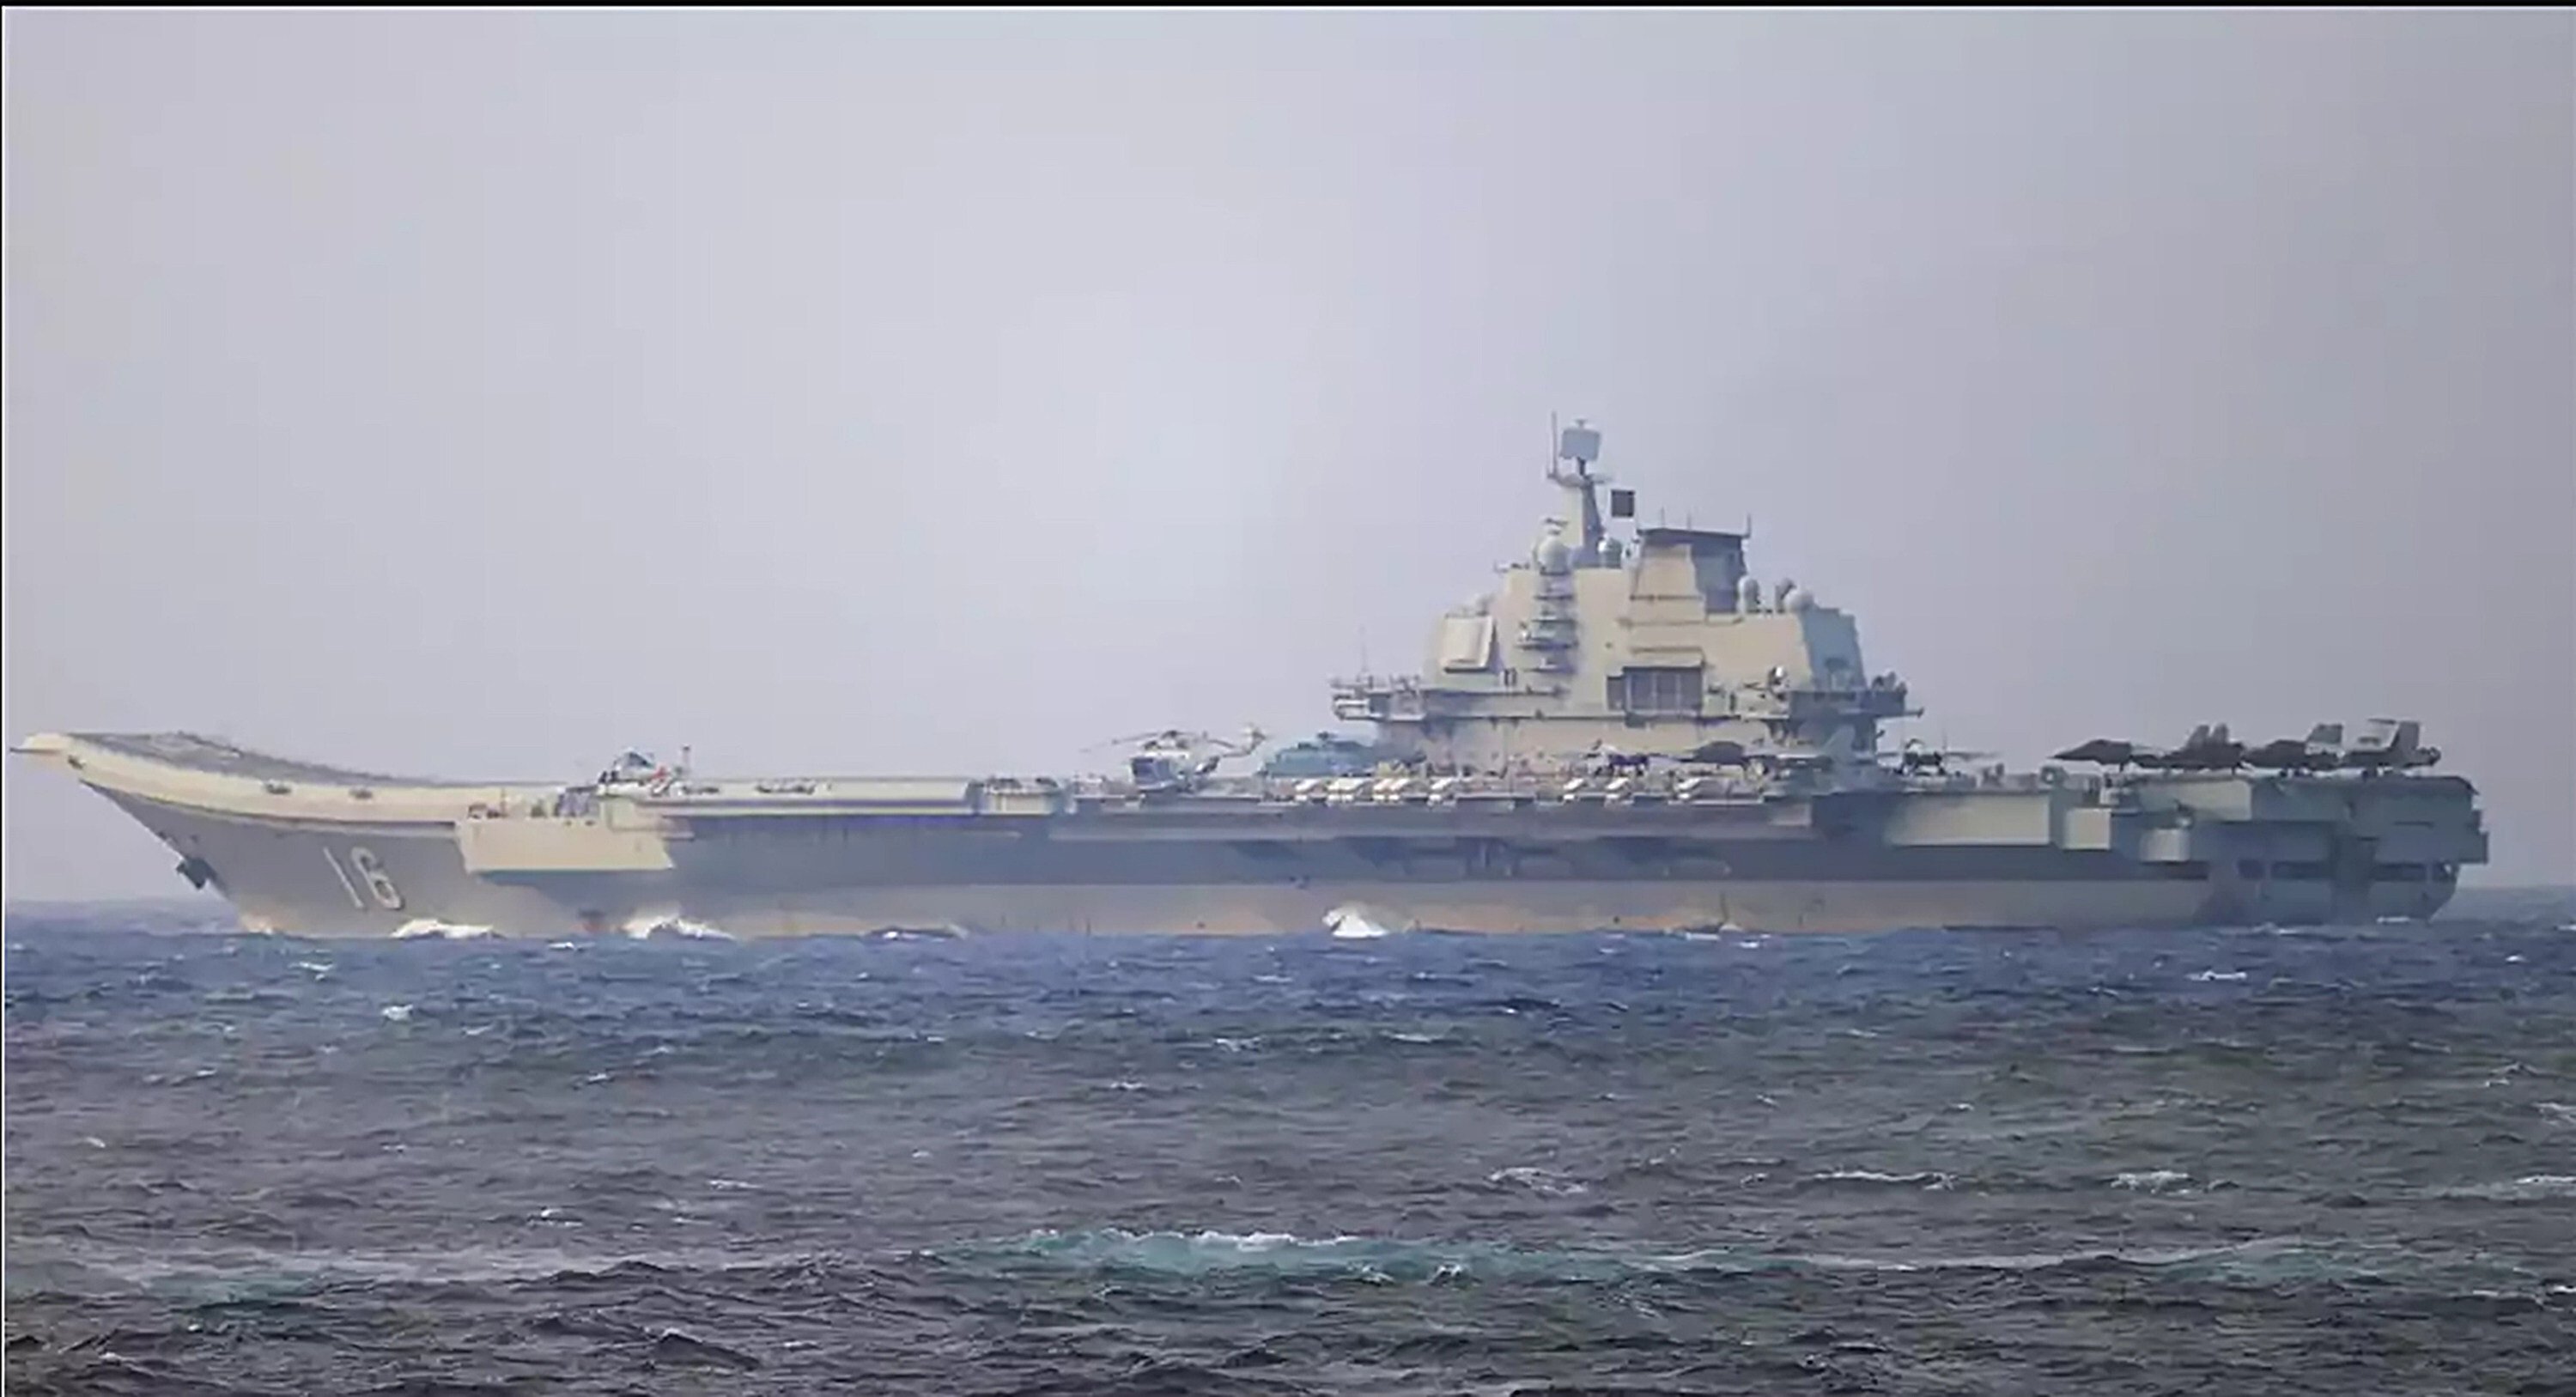 Chinese aircraft carrier Liaoning sails through the Miyako Strait near Japan’s Okinawa in April 2021. Photo: Defence Ministry of Japan
